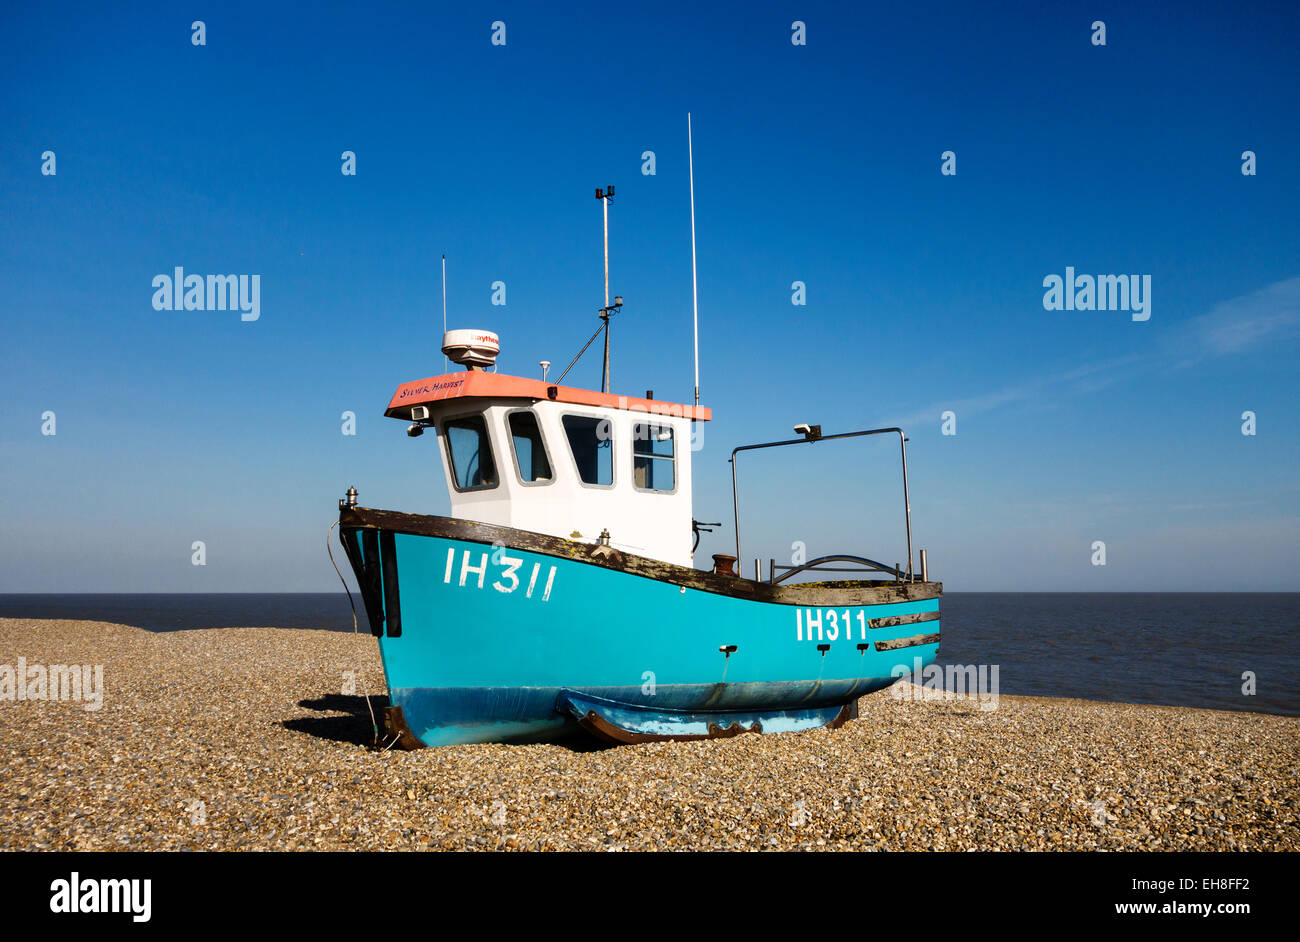 Aldeburgh, Suffolk, UK. A fishing boat (IH 311 Silver Harvest) drawn up on the shingle beach Stock Photo